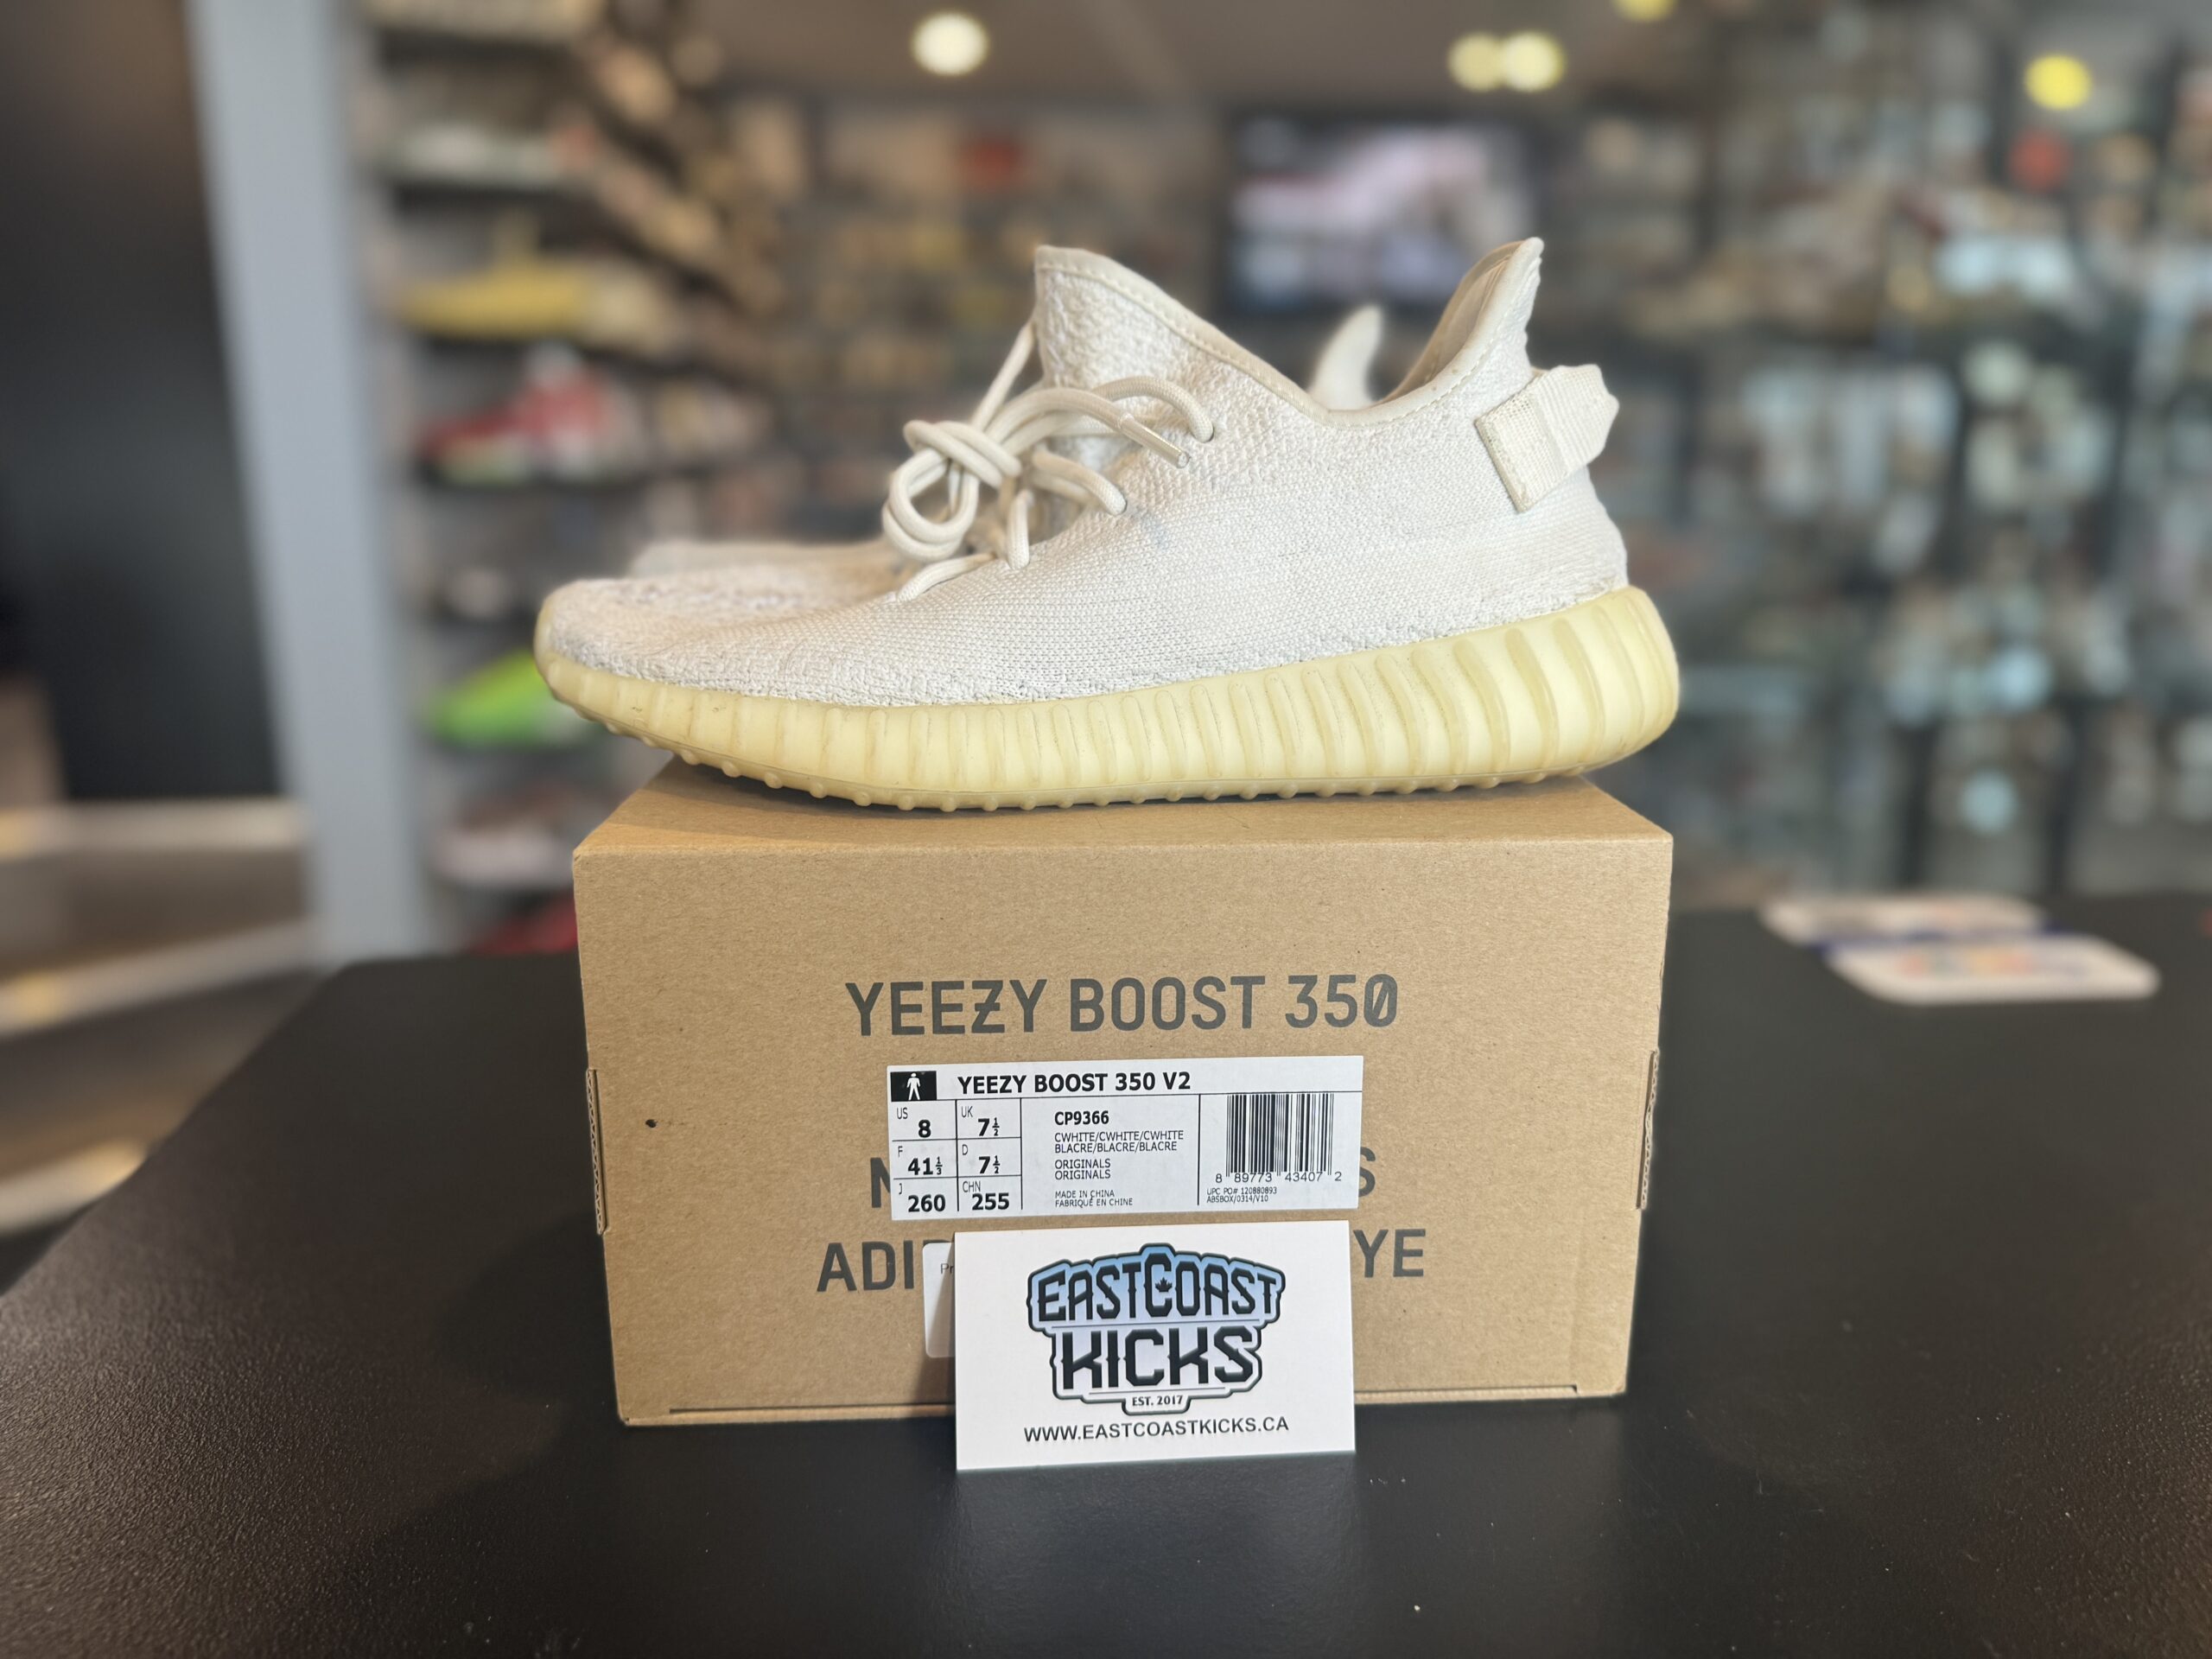 Preowned Adidas Yeezy Boost 350 V2 Cream Size 8